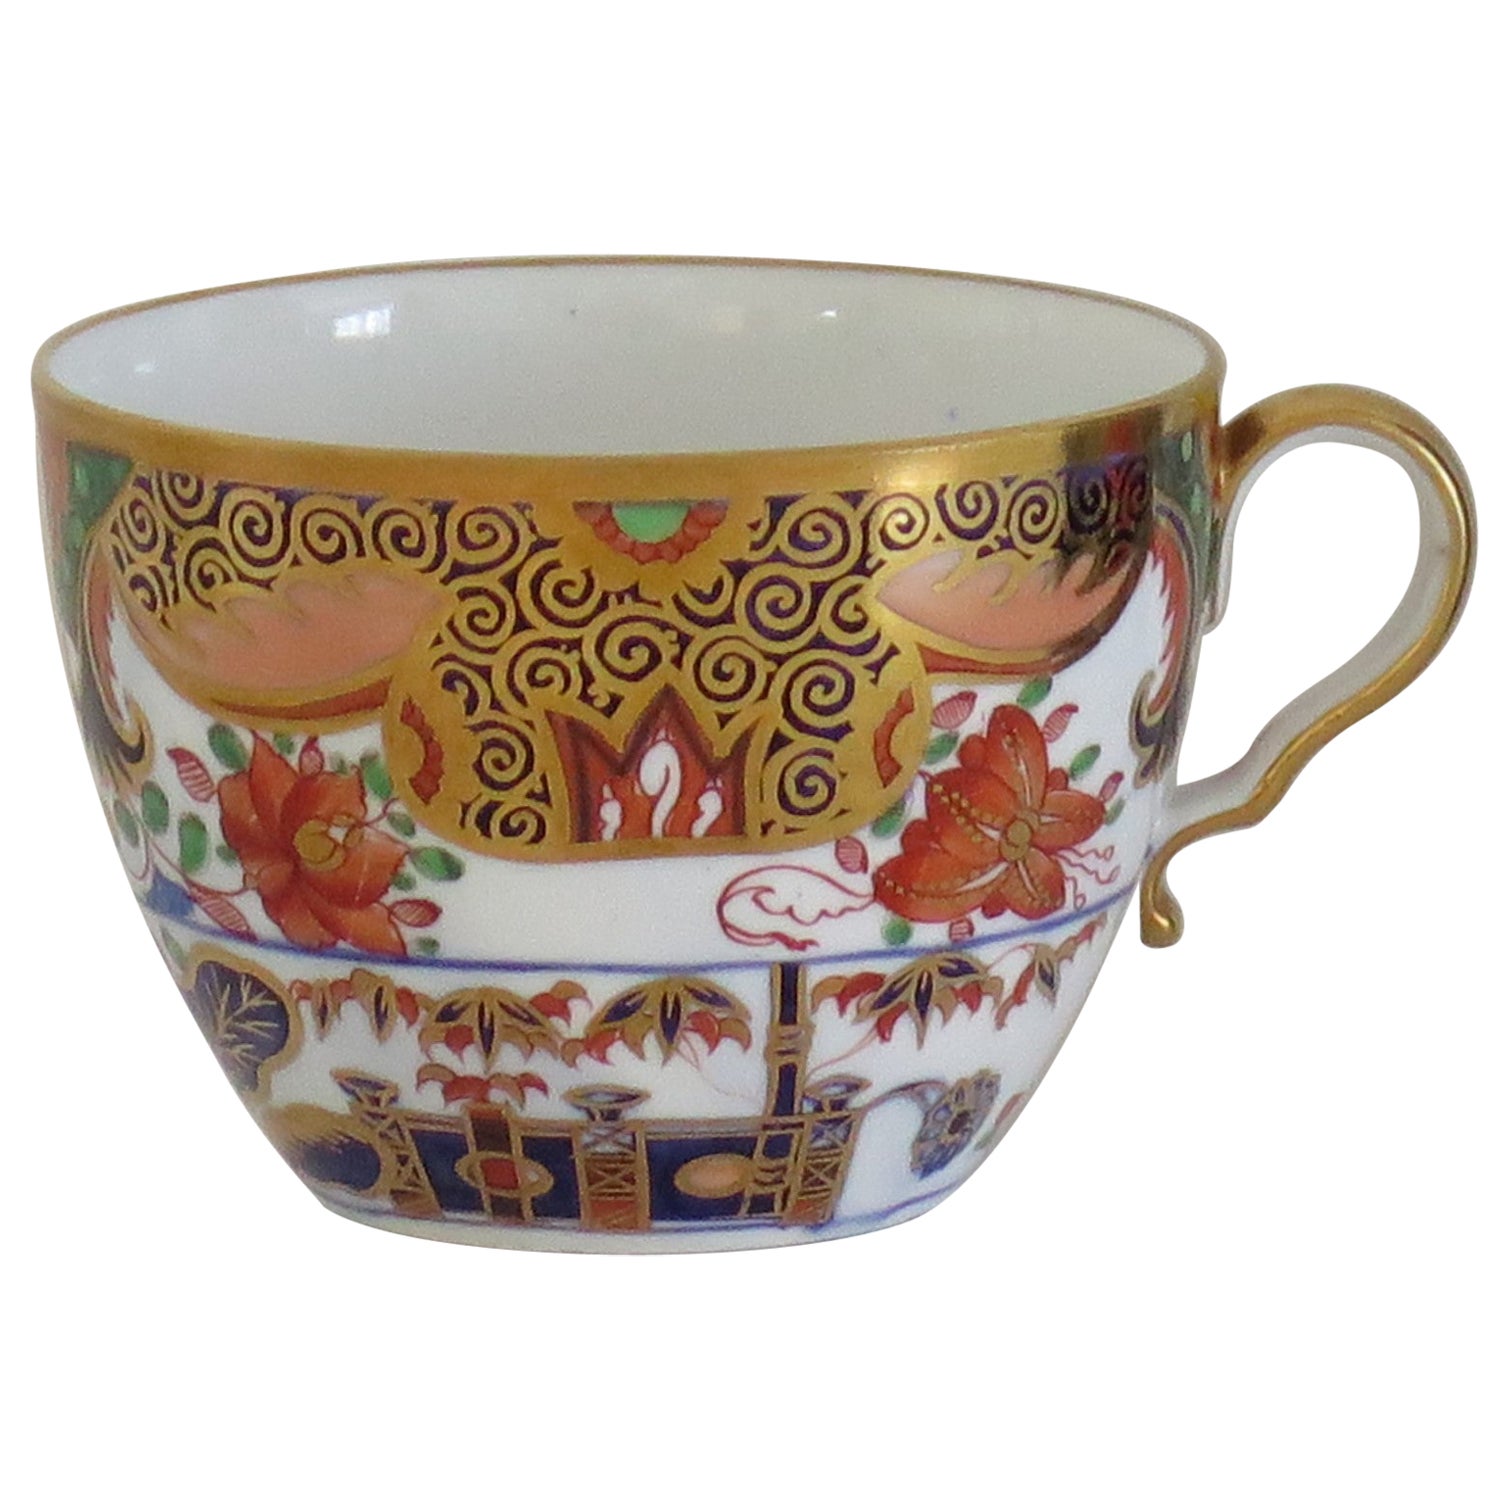 Spode Porcelain Tea Cup in Hand Painted & Gilded Pattern 967, circa 1810 For Sale